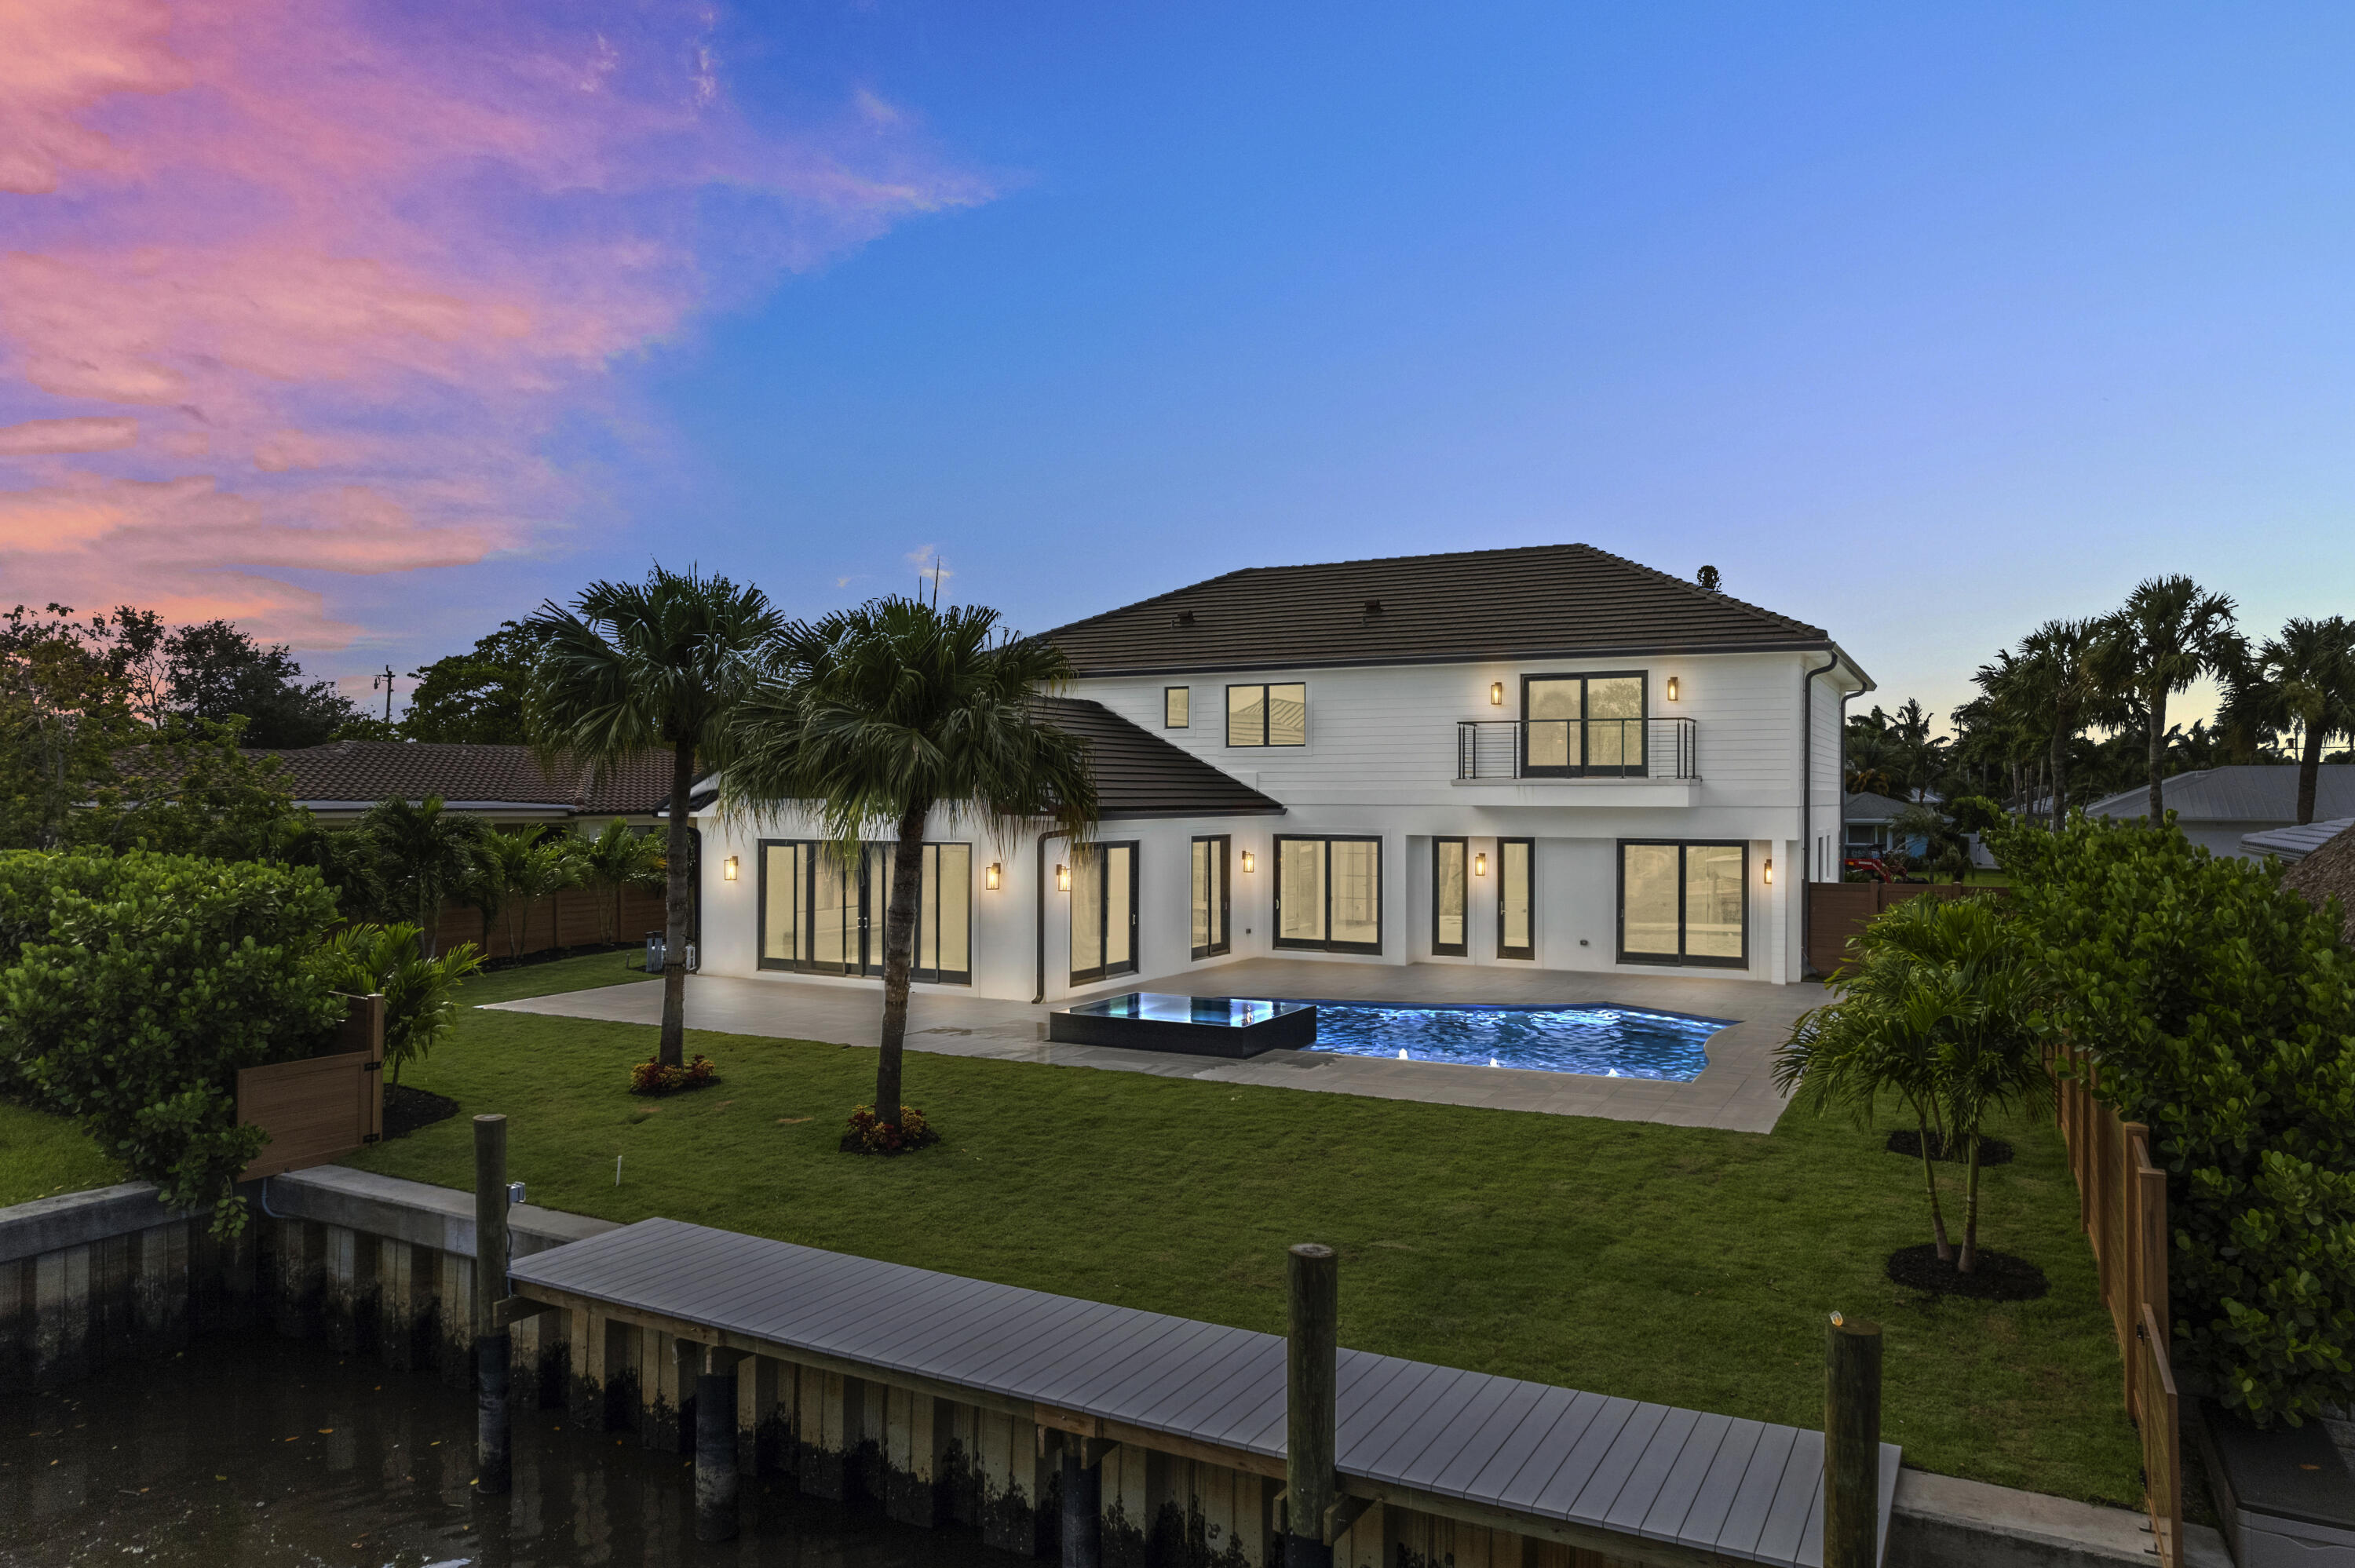 Absolutely gorgeous remodeled modern waterfront home located in the desirable Village of Tequesta. Enjoy an idyllic setting along the Loxahatchee River in this CBS 5 bedroom, 6 bathroom home offering 60' of private waterfront and a private 34' dock, with ocean access & one 14' fixed bridge.No expense was spared on the construction of this impressive residence, with designer selections hand picked throughout the 3,920 sq. ft. of living space and 4,755 Sq. Ft. total. Enjoy the highest quality appliances and fixtures in the massive chef's kitchen, complete with marble countertops, custom cabinetry, and hidden walk-in pantry. The primary suite exudes luxury with a private balcony, a generous walk in closet, and spa-like bathroom.In the private backyard you have resort-style amenities; a modern heated saltwater pool with sunshelf and spa, large format marble pavers, and composite dock with electrical and water hookup. 

You can't beat this location, with swift intracoastal access for boating and centrally located to Tequesta's best restaurant and shops, A-rated schools, and amazing parks. Easy access to beaches, highways and airports.